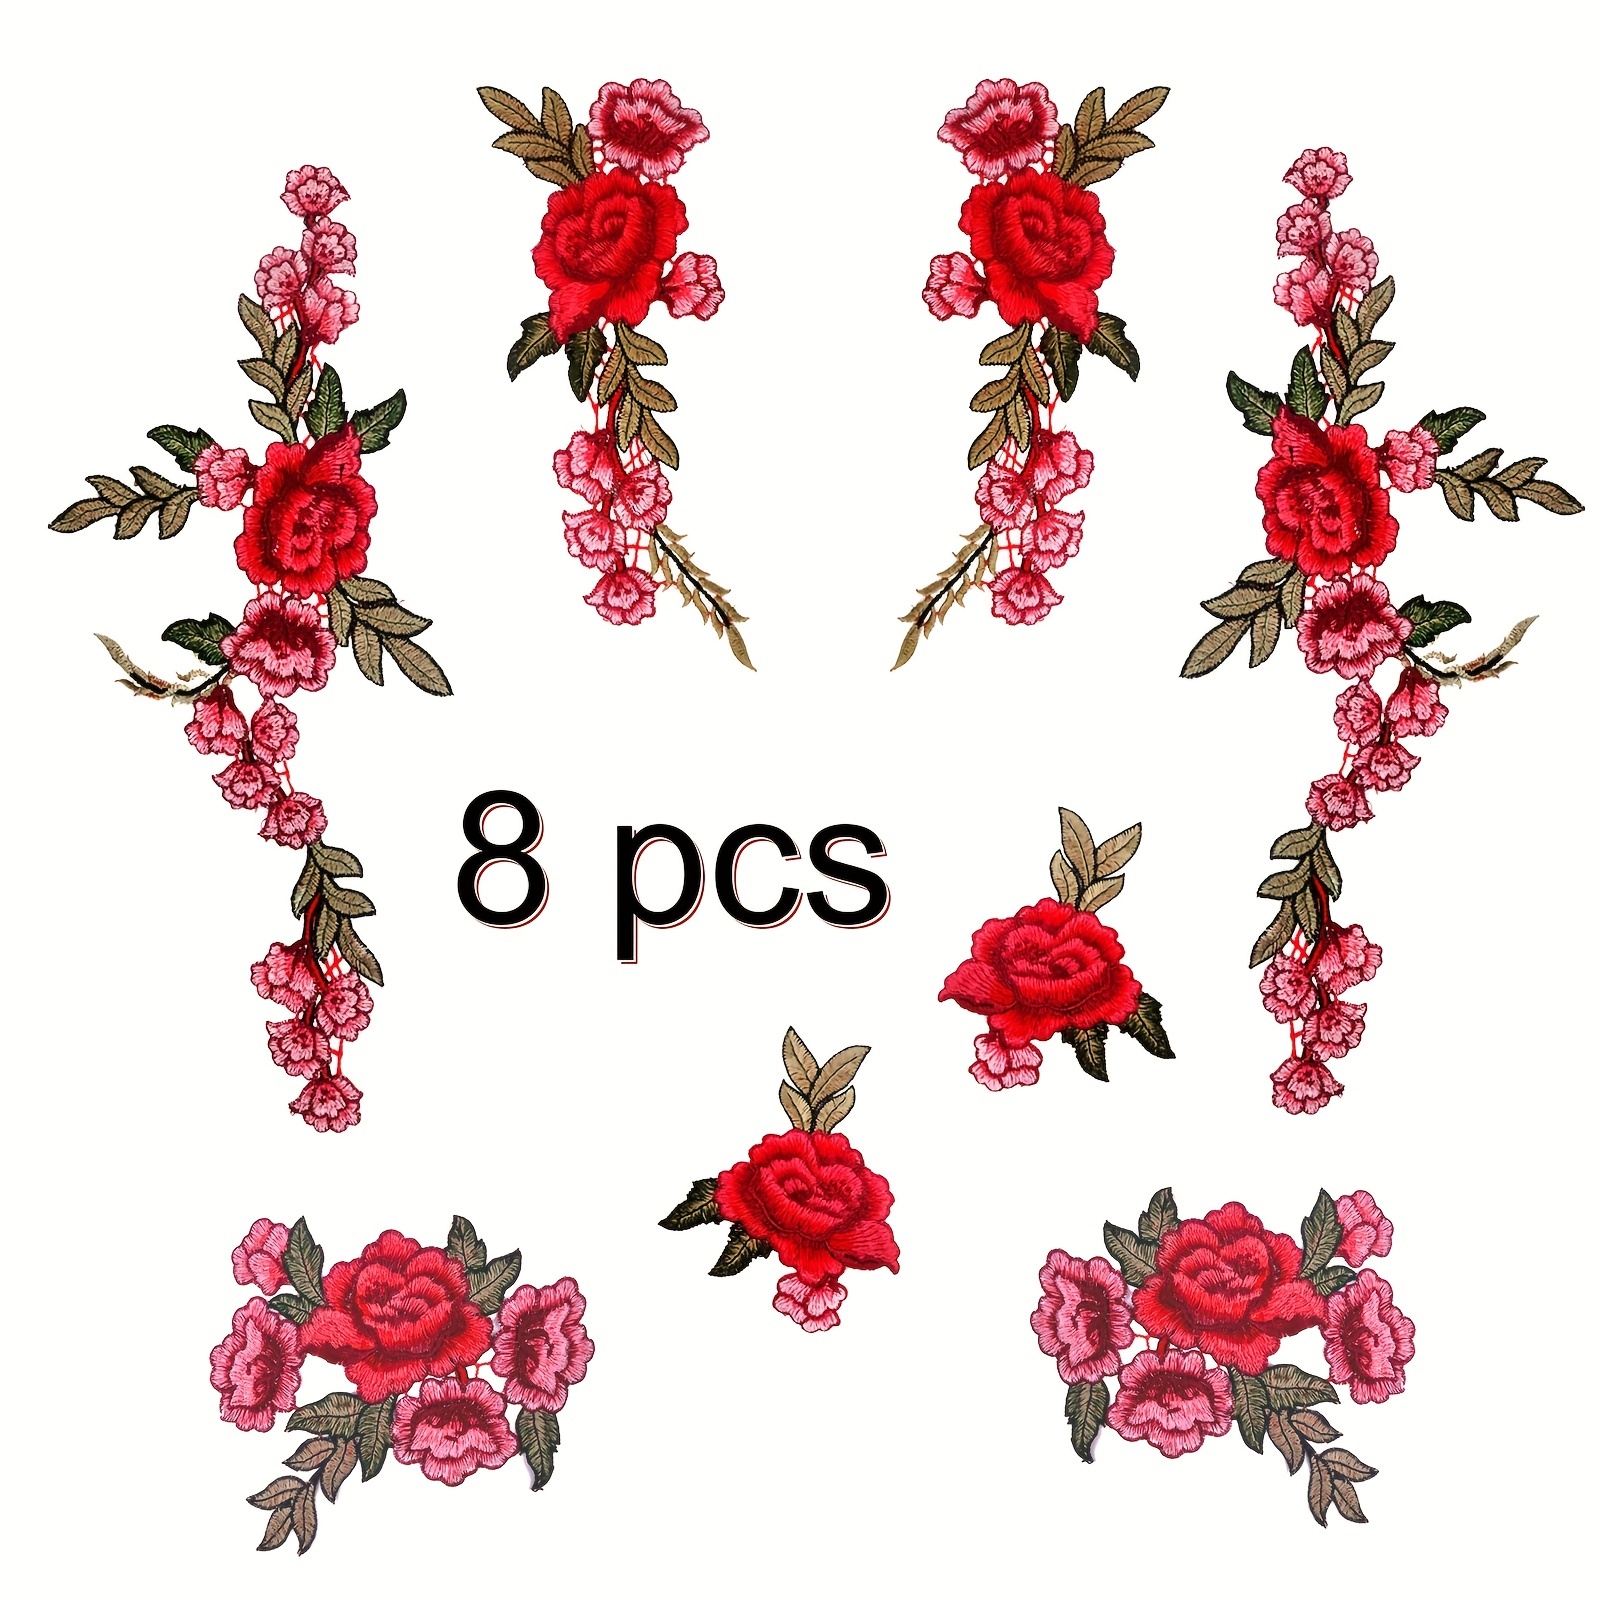 8pcs 4 Pairs Embroidered Applique Patches Rose Flower Sew On Patch Applique  For DIY Clothing, Jeans, Sewing Jackets Clothing Backpacks T-shirt